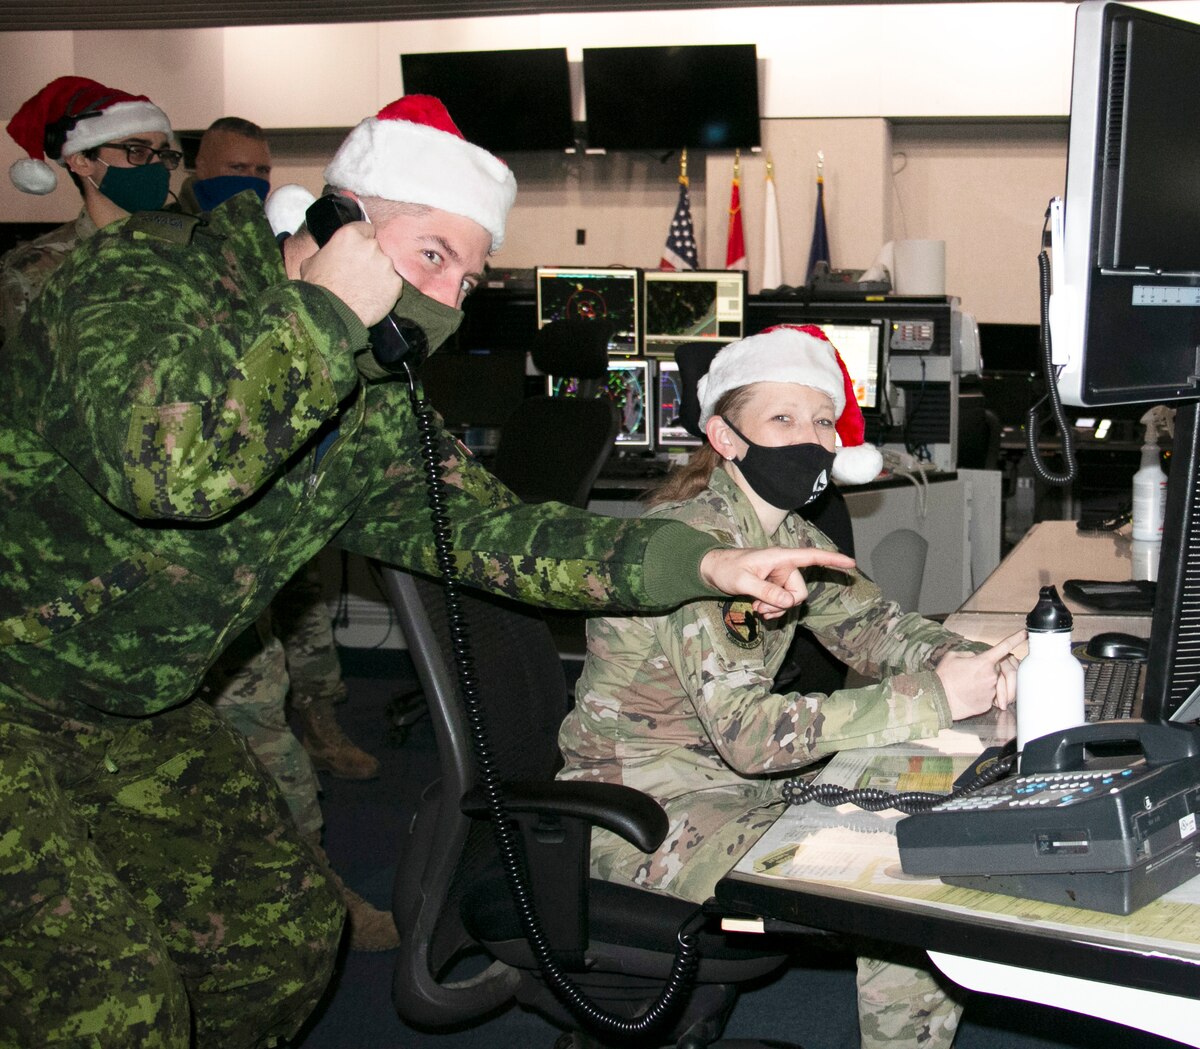 Capt. Kevin Vincent of the Royal Canadian Air Force, left, and Airman 1st Class Megan Mills of the New York Air National Guard’s 224th Air Defense Squadron, recently conducted training at the Eastern Air Defense Sector in Rome, N.Y., in preparation for NORAD Tracks Santa operations on Christmas Eve.